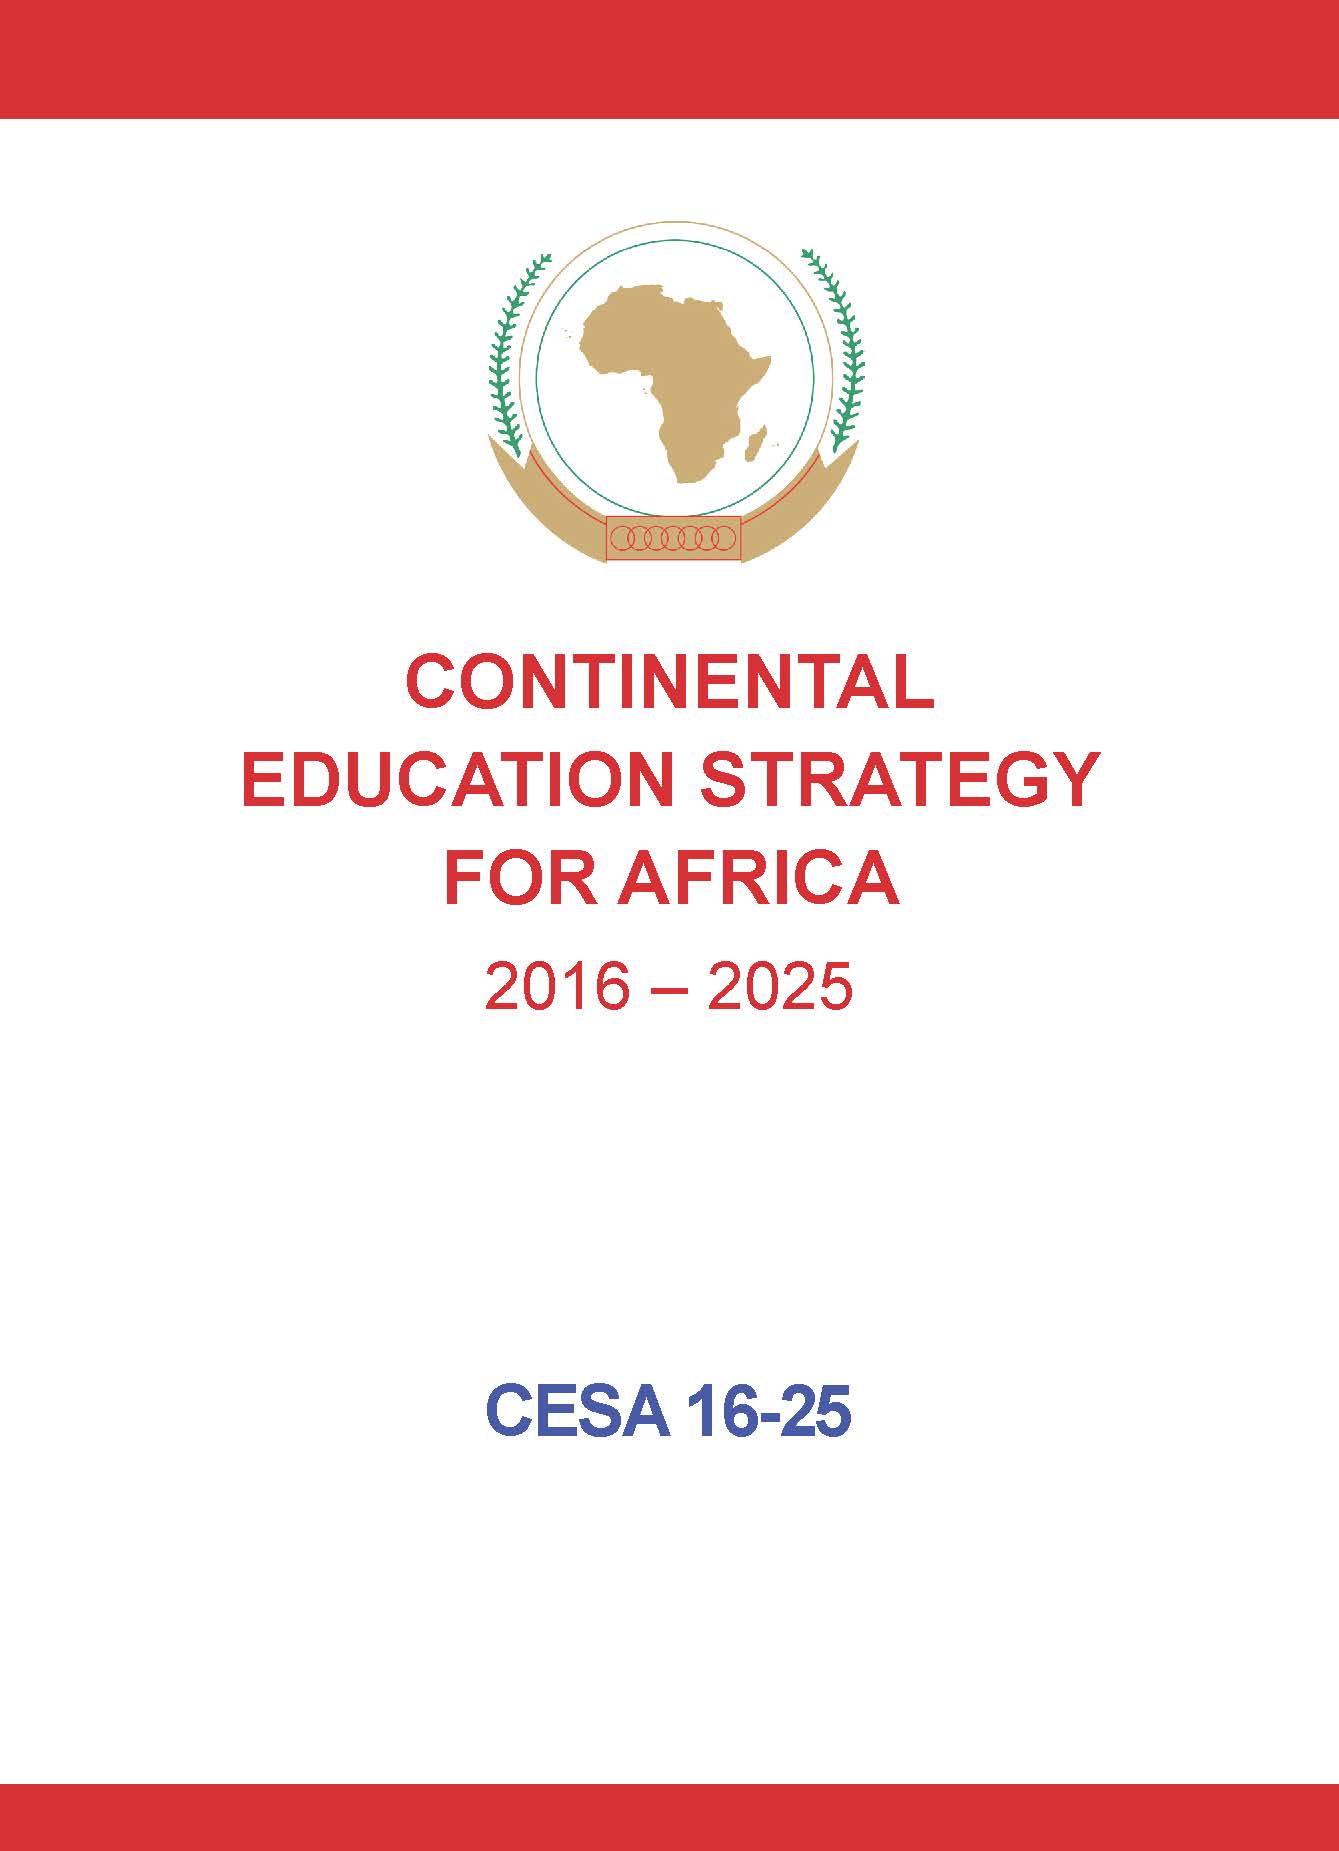 continental education strategy for Africa